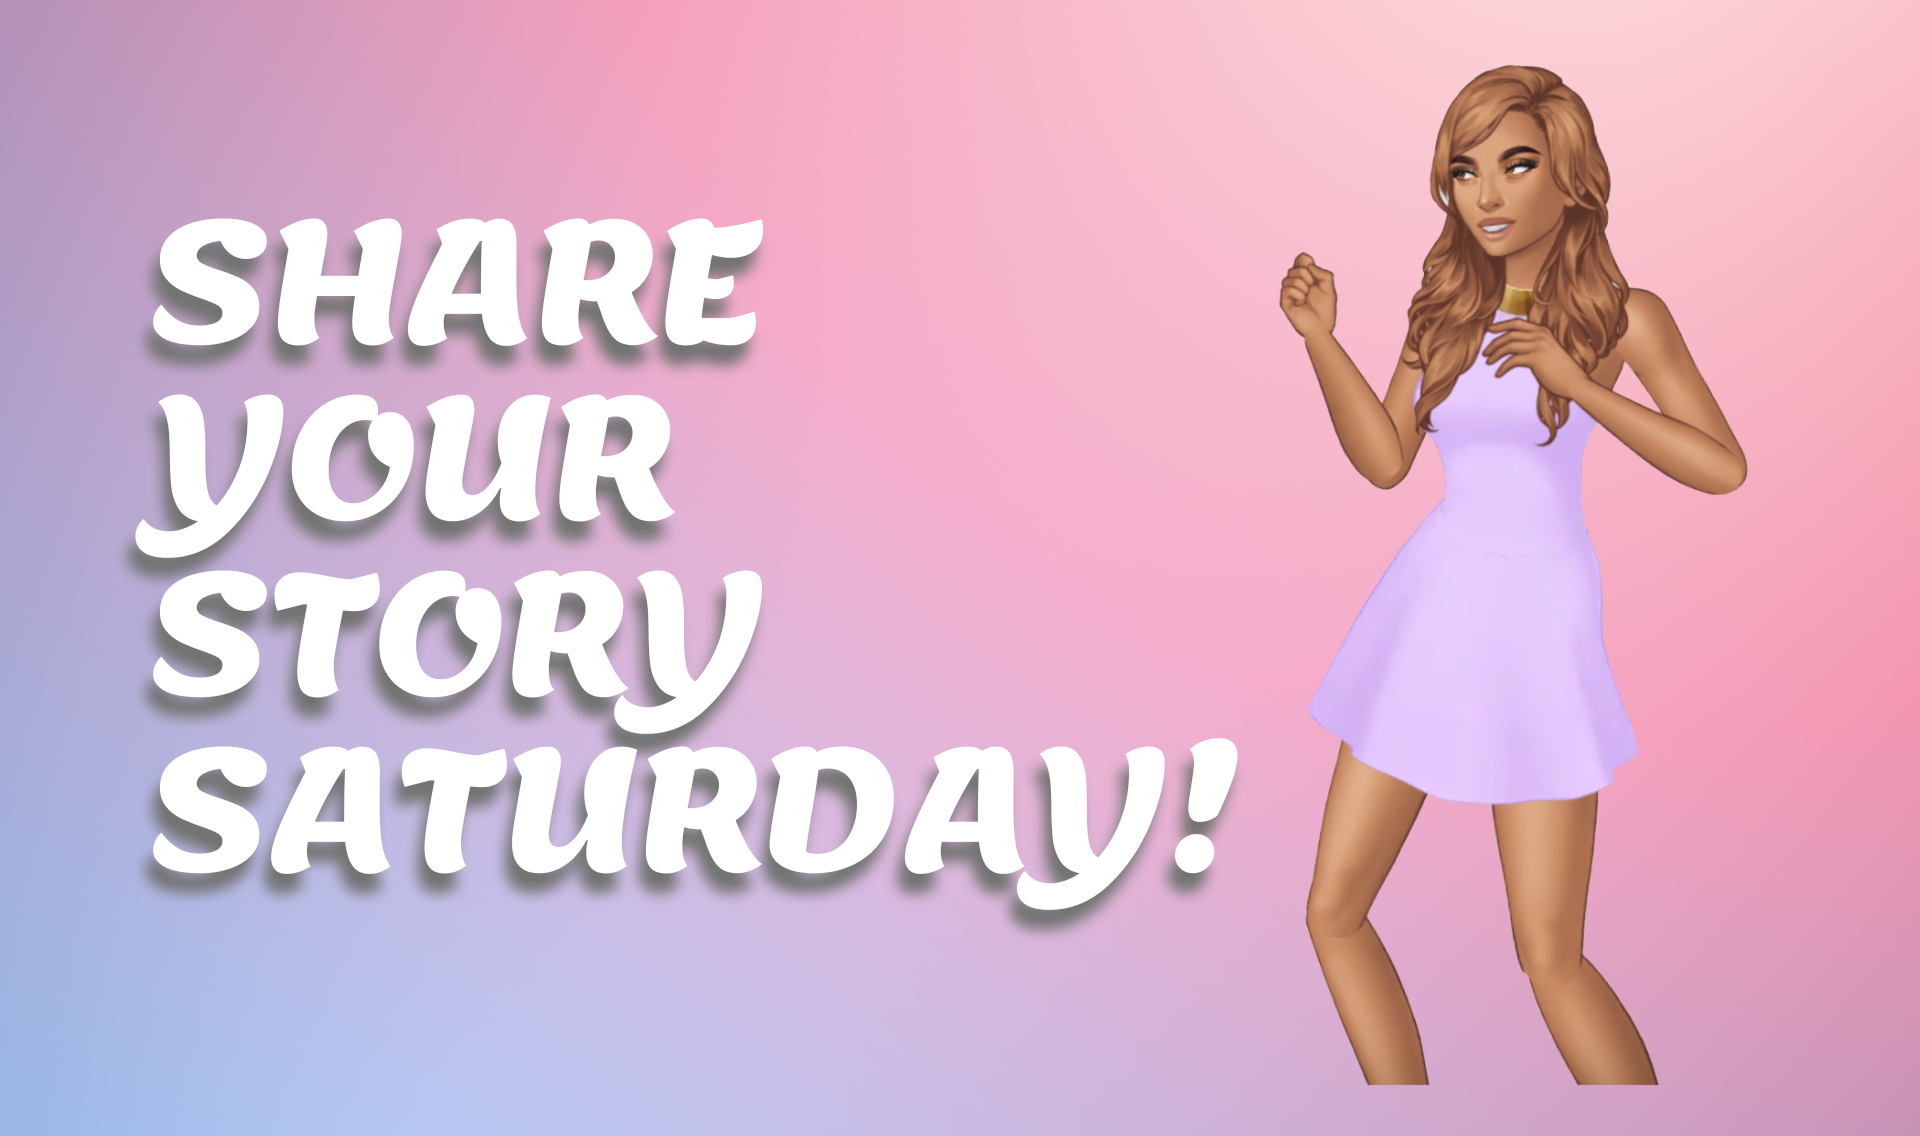 Share Your Story Saturday!